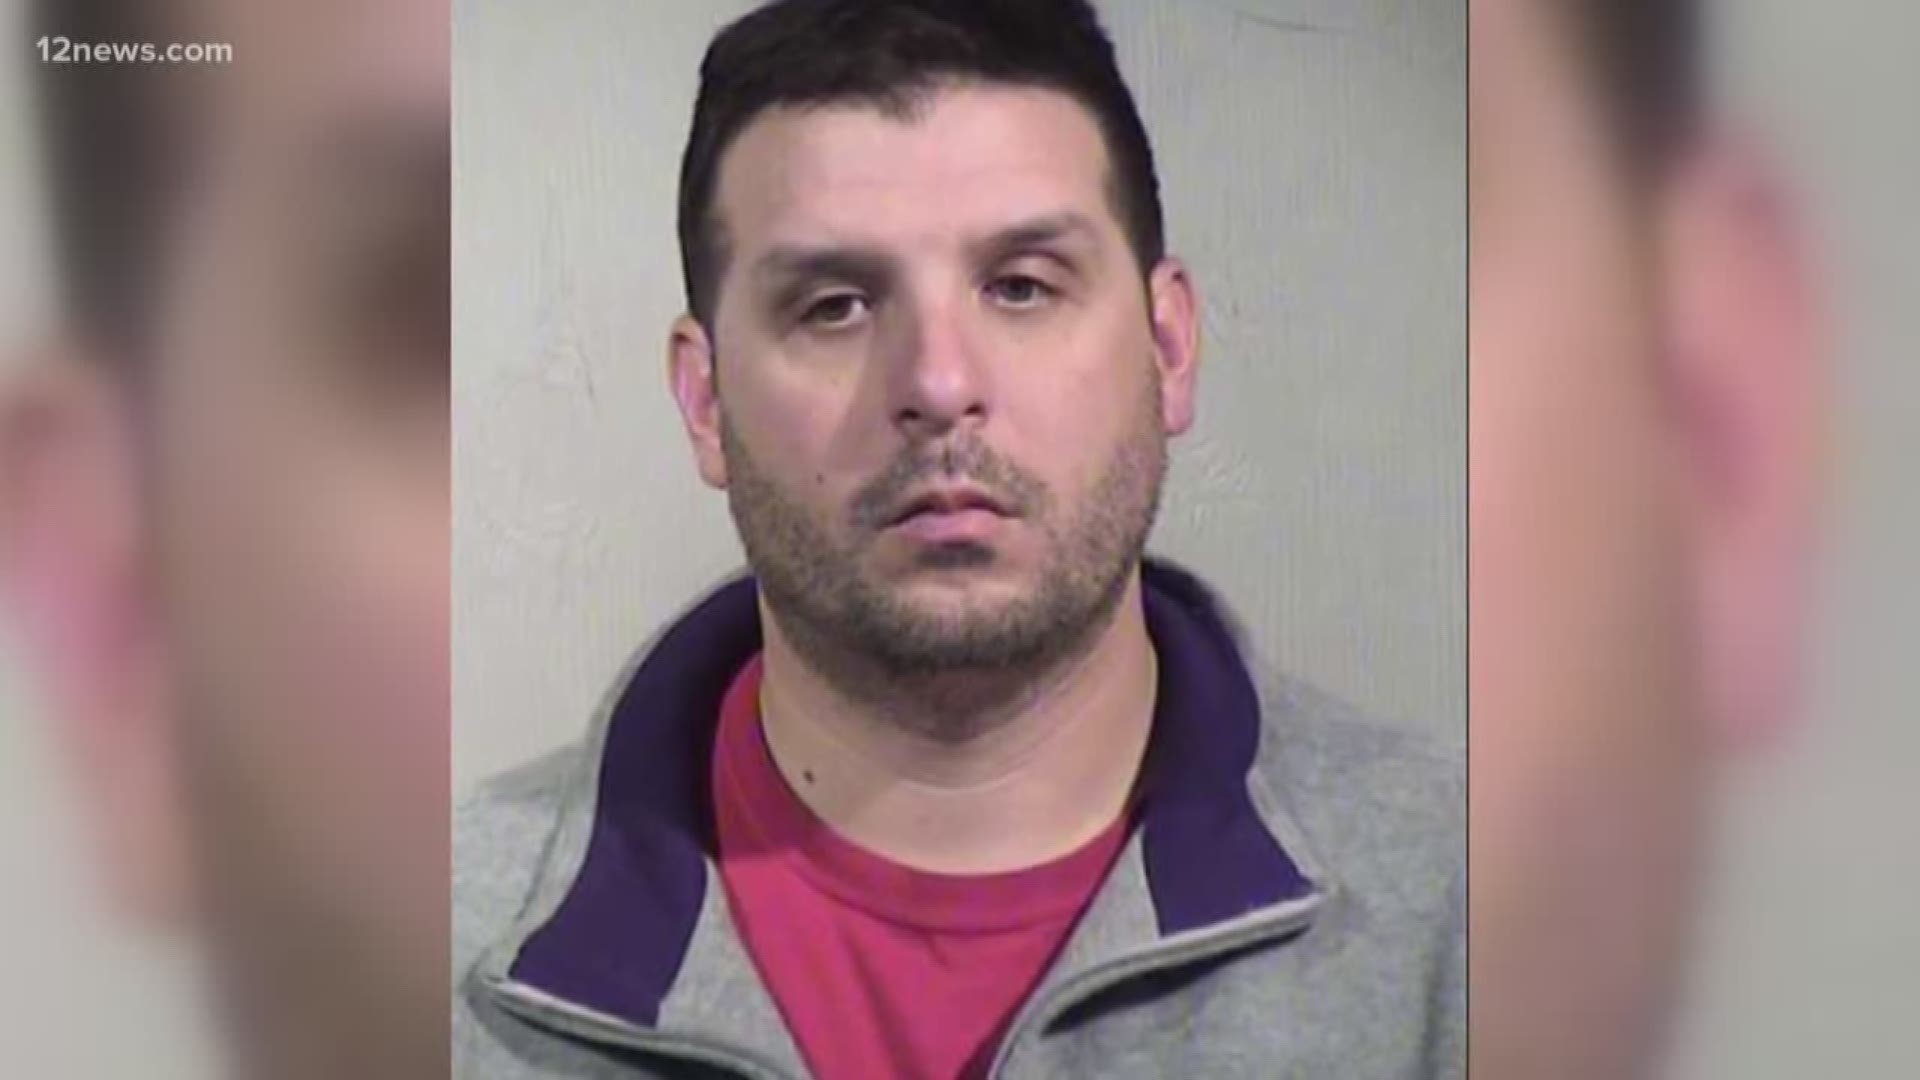 The head football coach at Mountain Ridge High School in Glendale is accused of trying to meet a 14-year-old boy for sex. The "boy" was an undercover police officer.